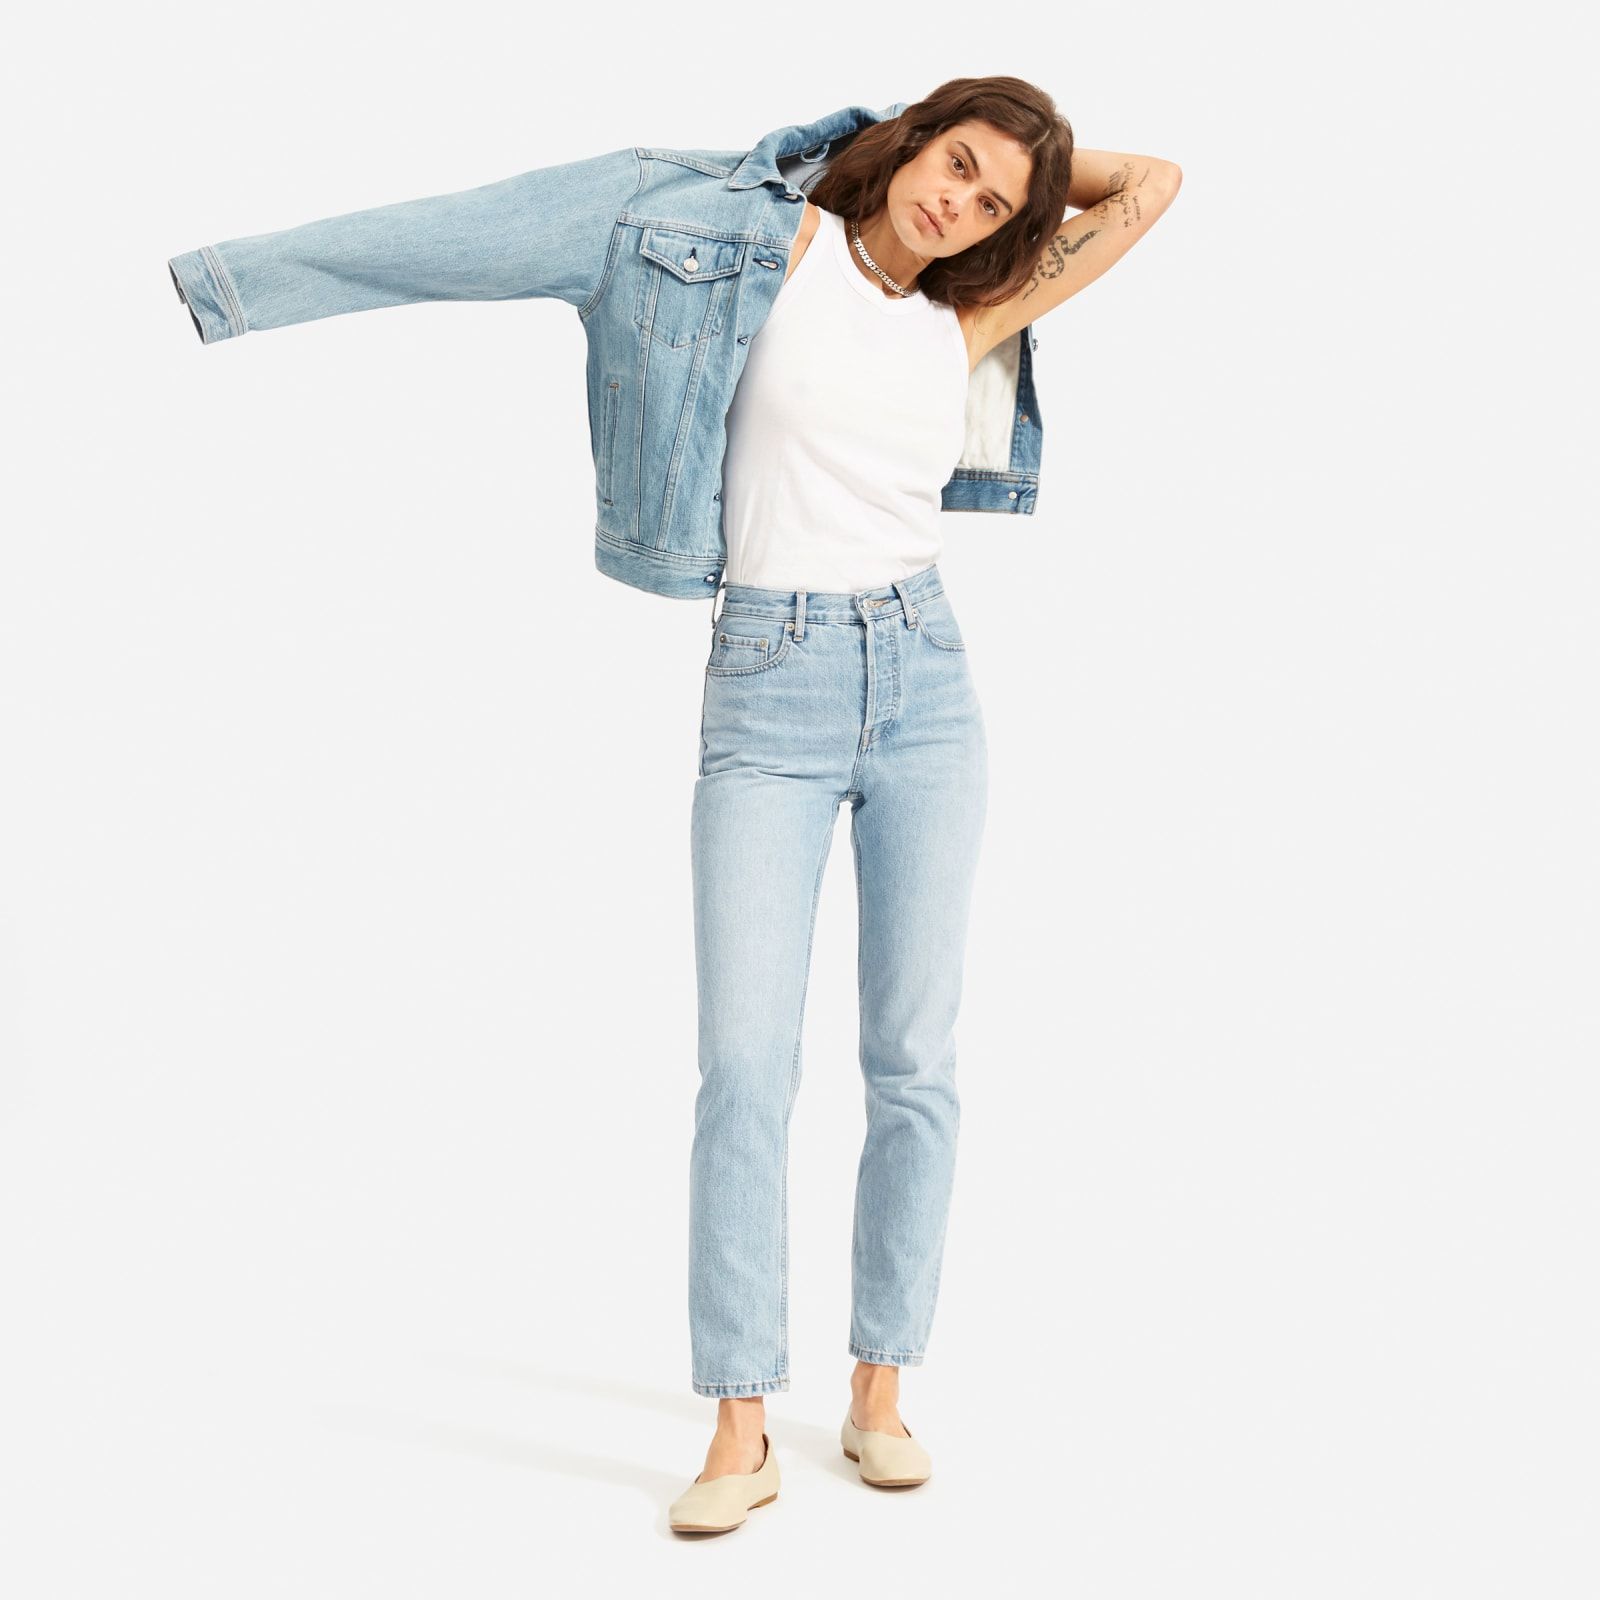 Women's '90s Cheeky Straight Jean by Everlane in Vintage Sunbleached Blue, Size 23 | Everlane